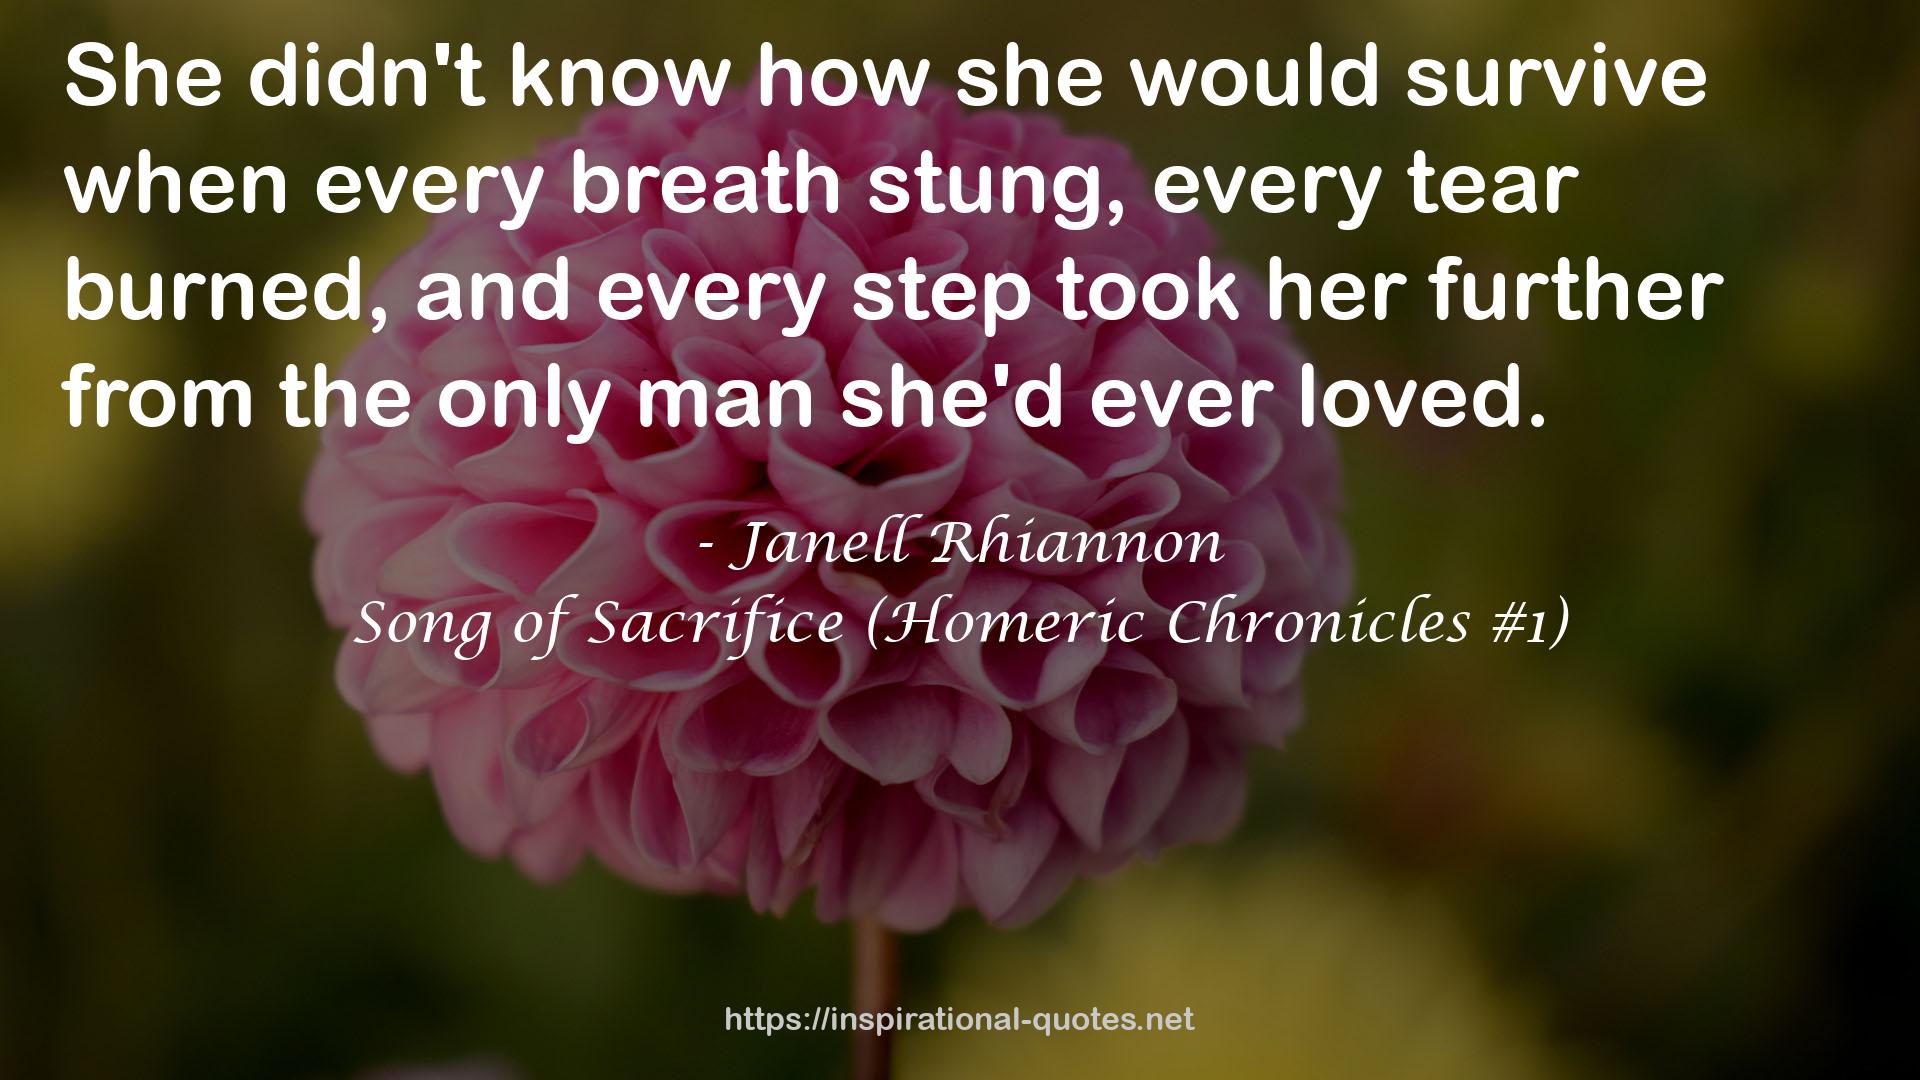 Song of Sacrifice (Homeric Chronicles #1) QUOTES